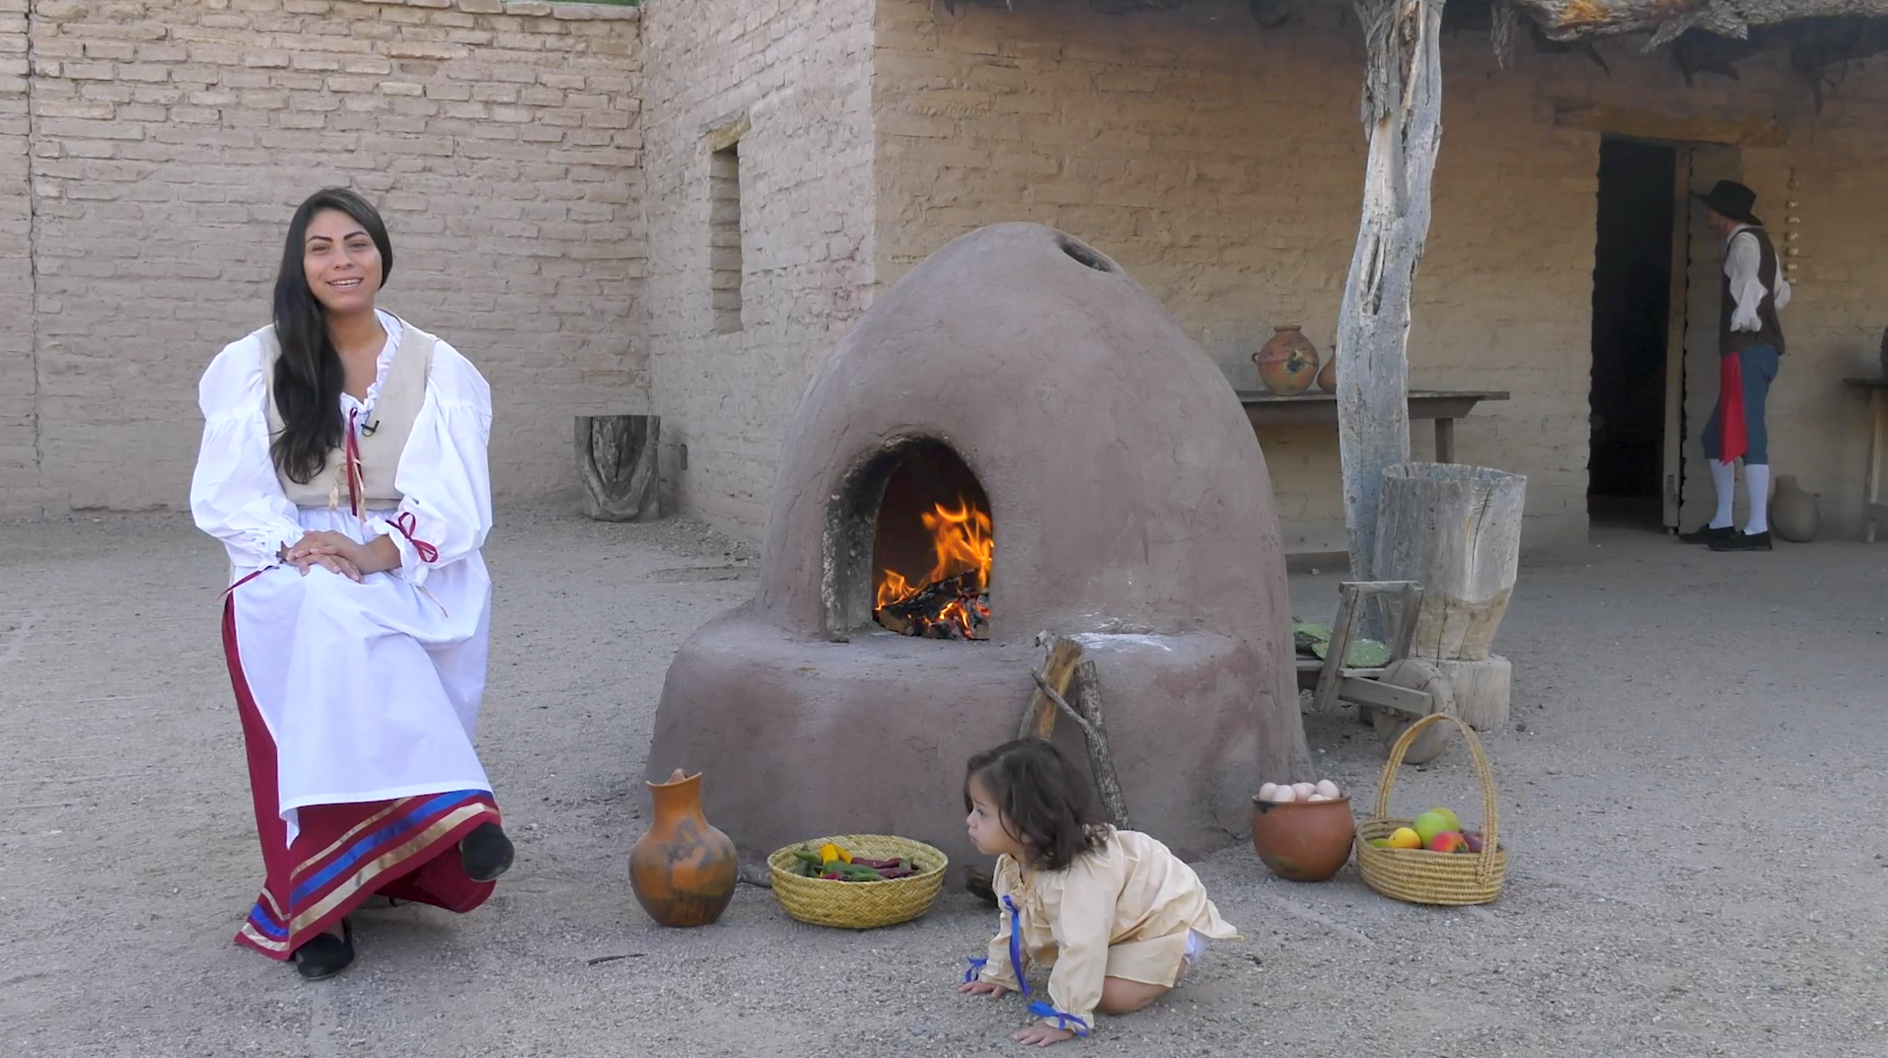 A woman in 18th century dress sits near an earthen oven